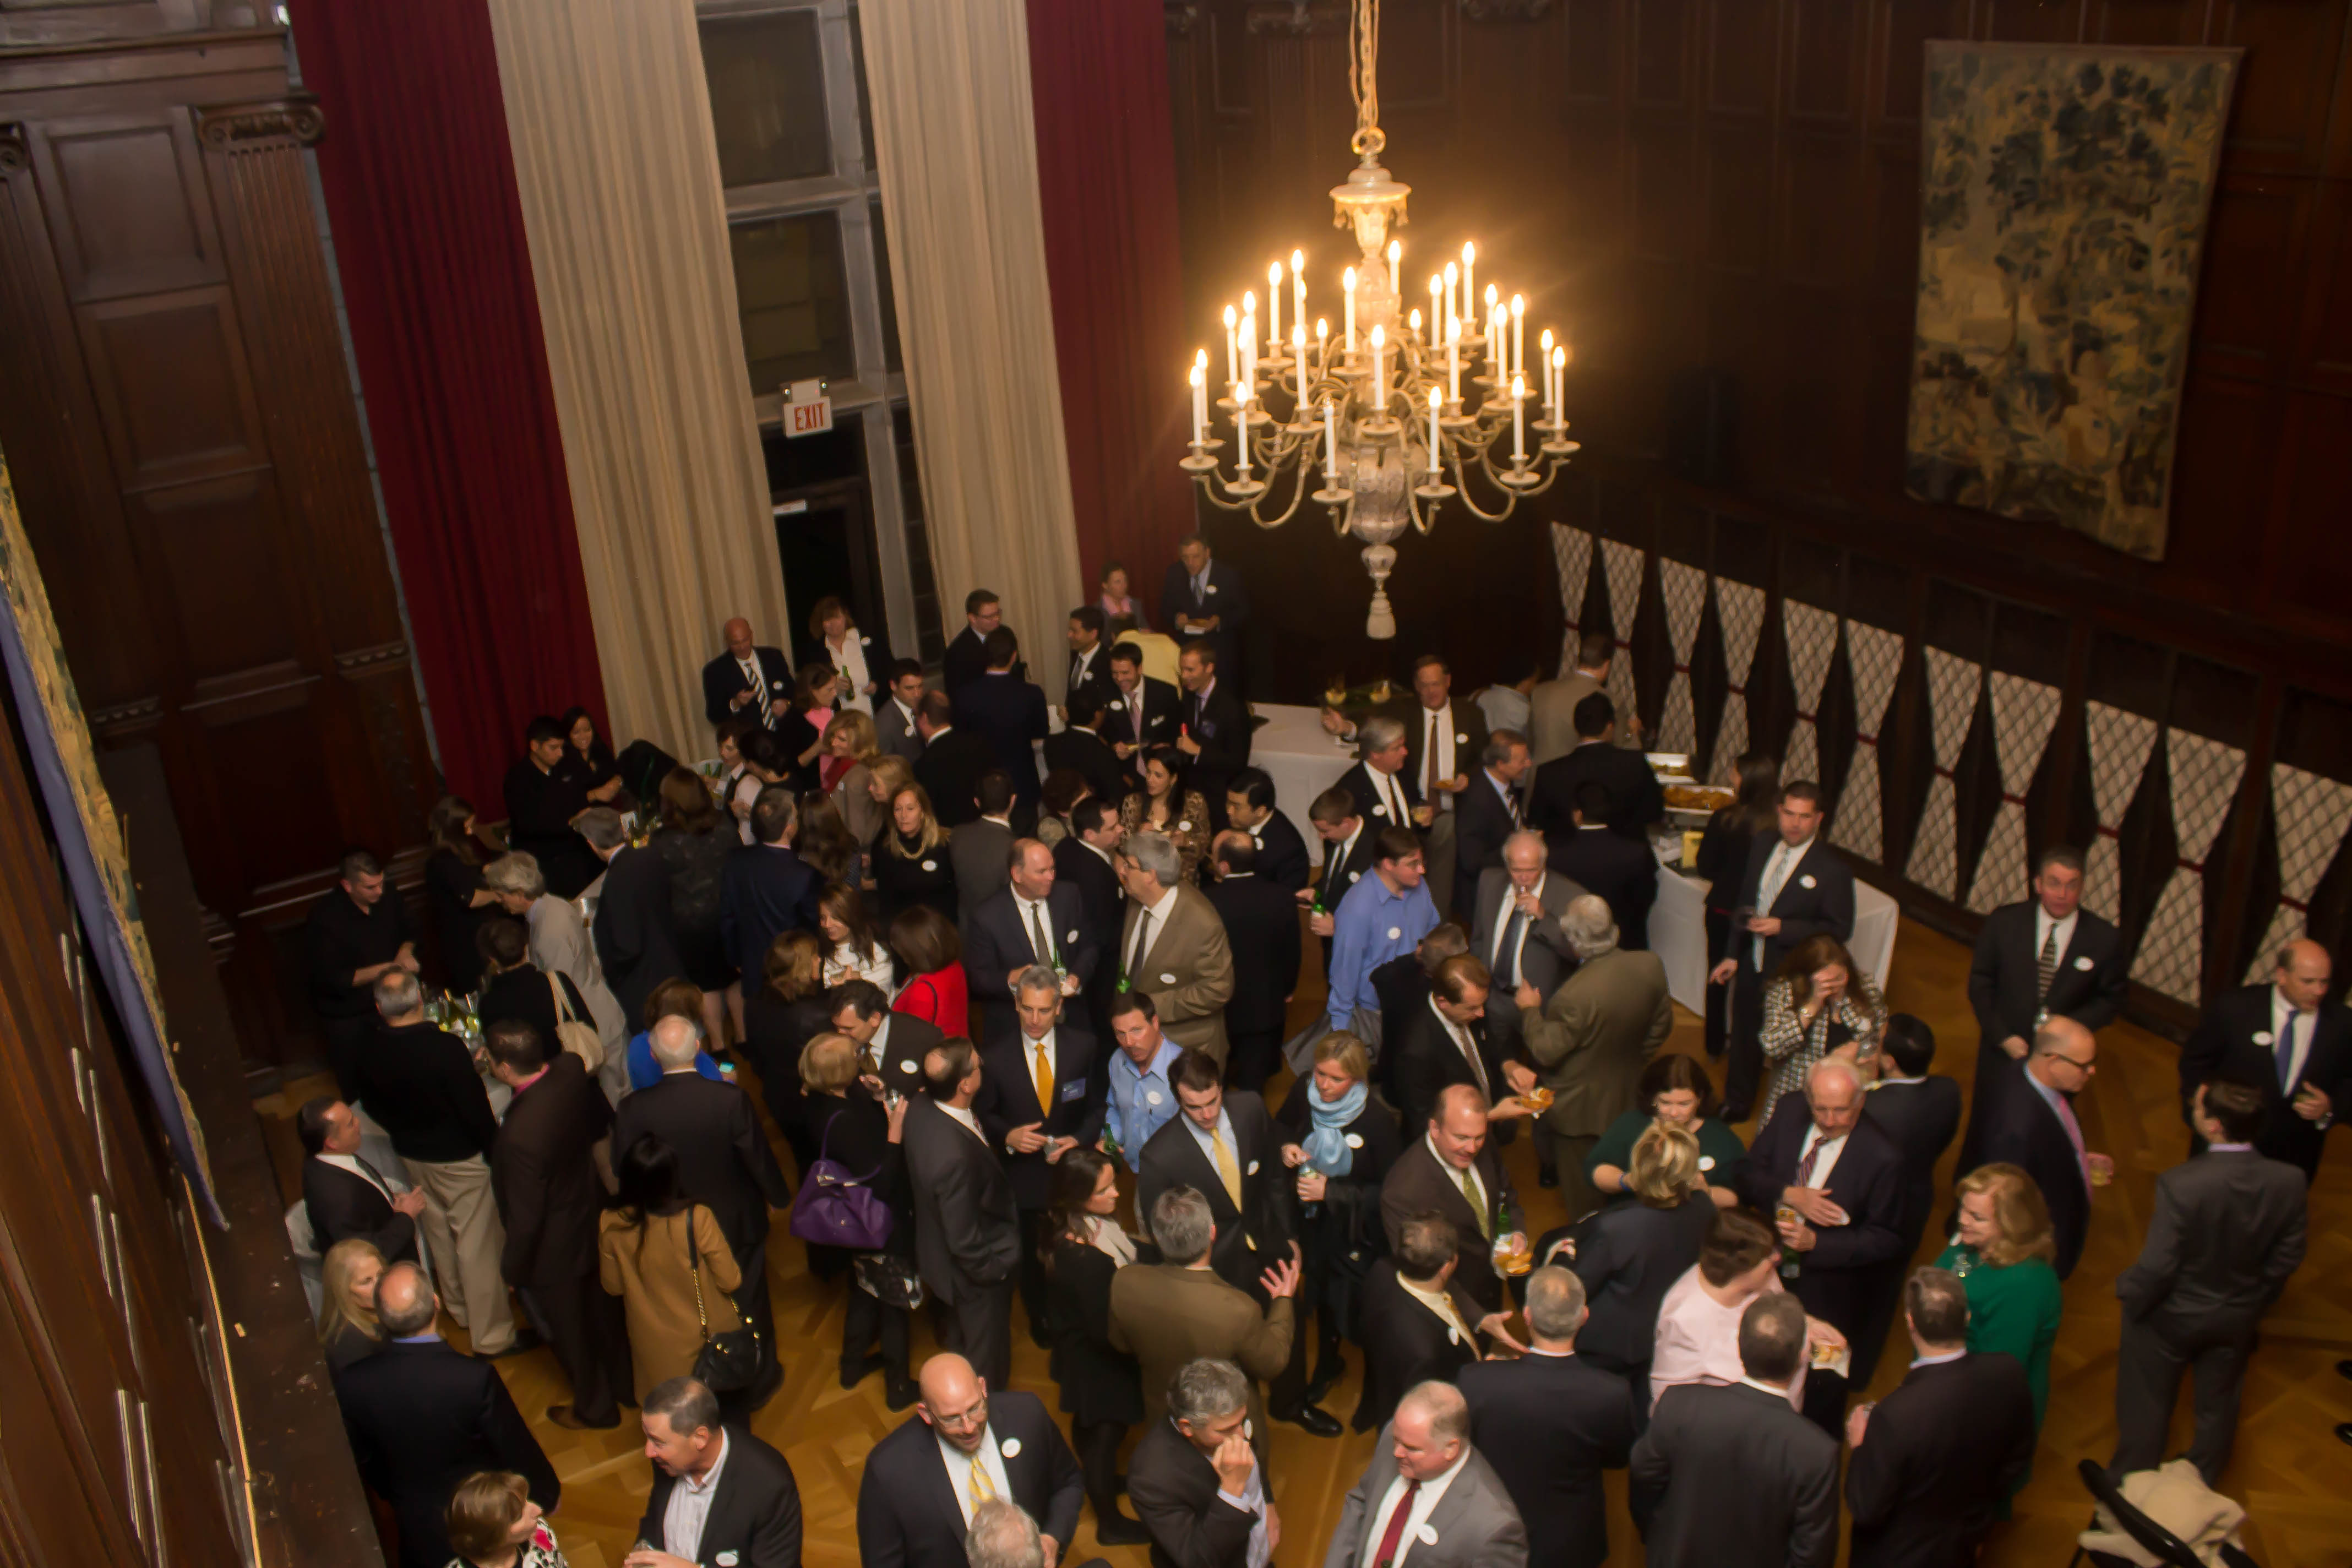 More than 200 business professionals and family attended the first-ever Westchester CPA “Beyond the Bottom Line” awards, Nov. 17 at Manhattanville College.